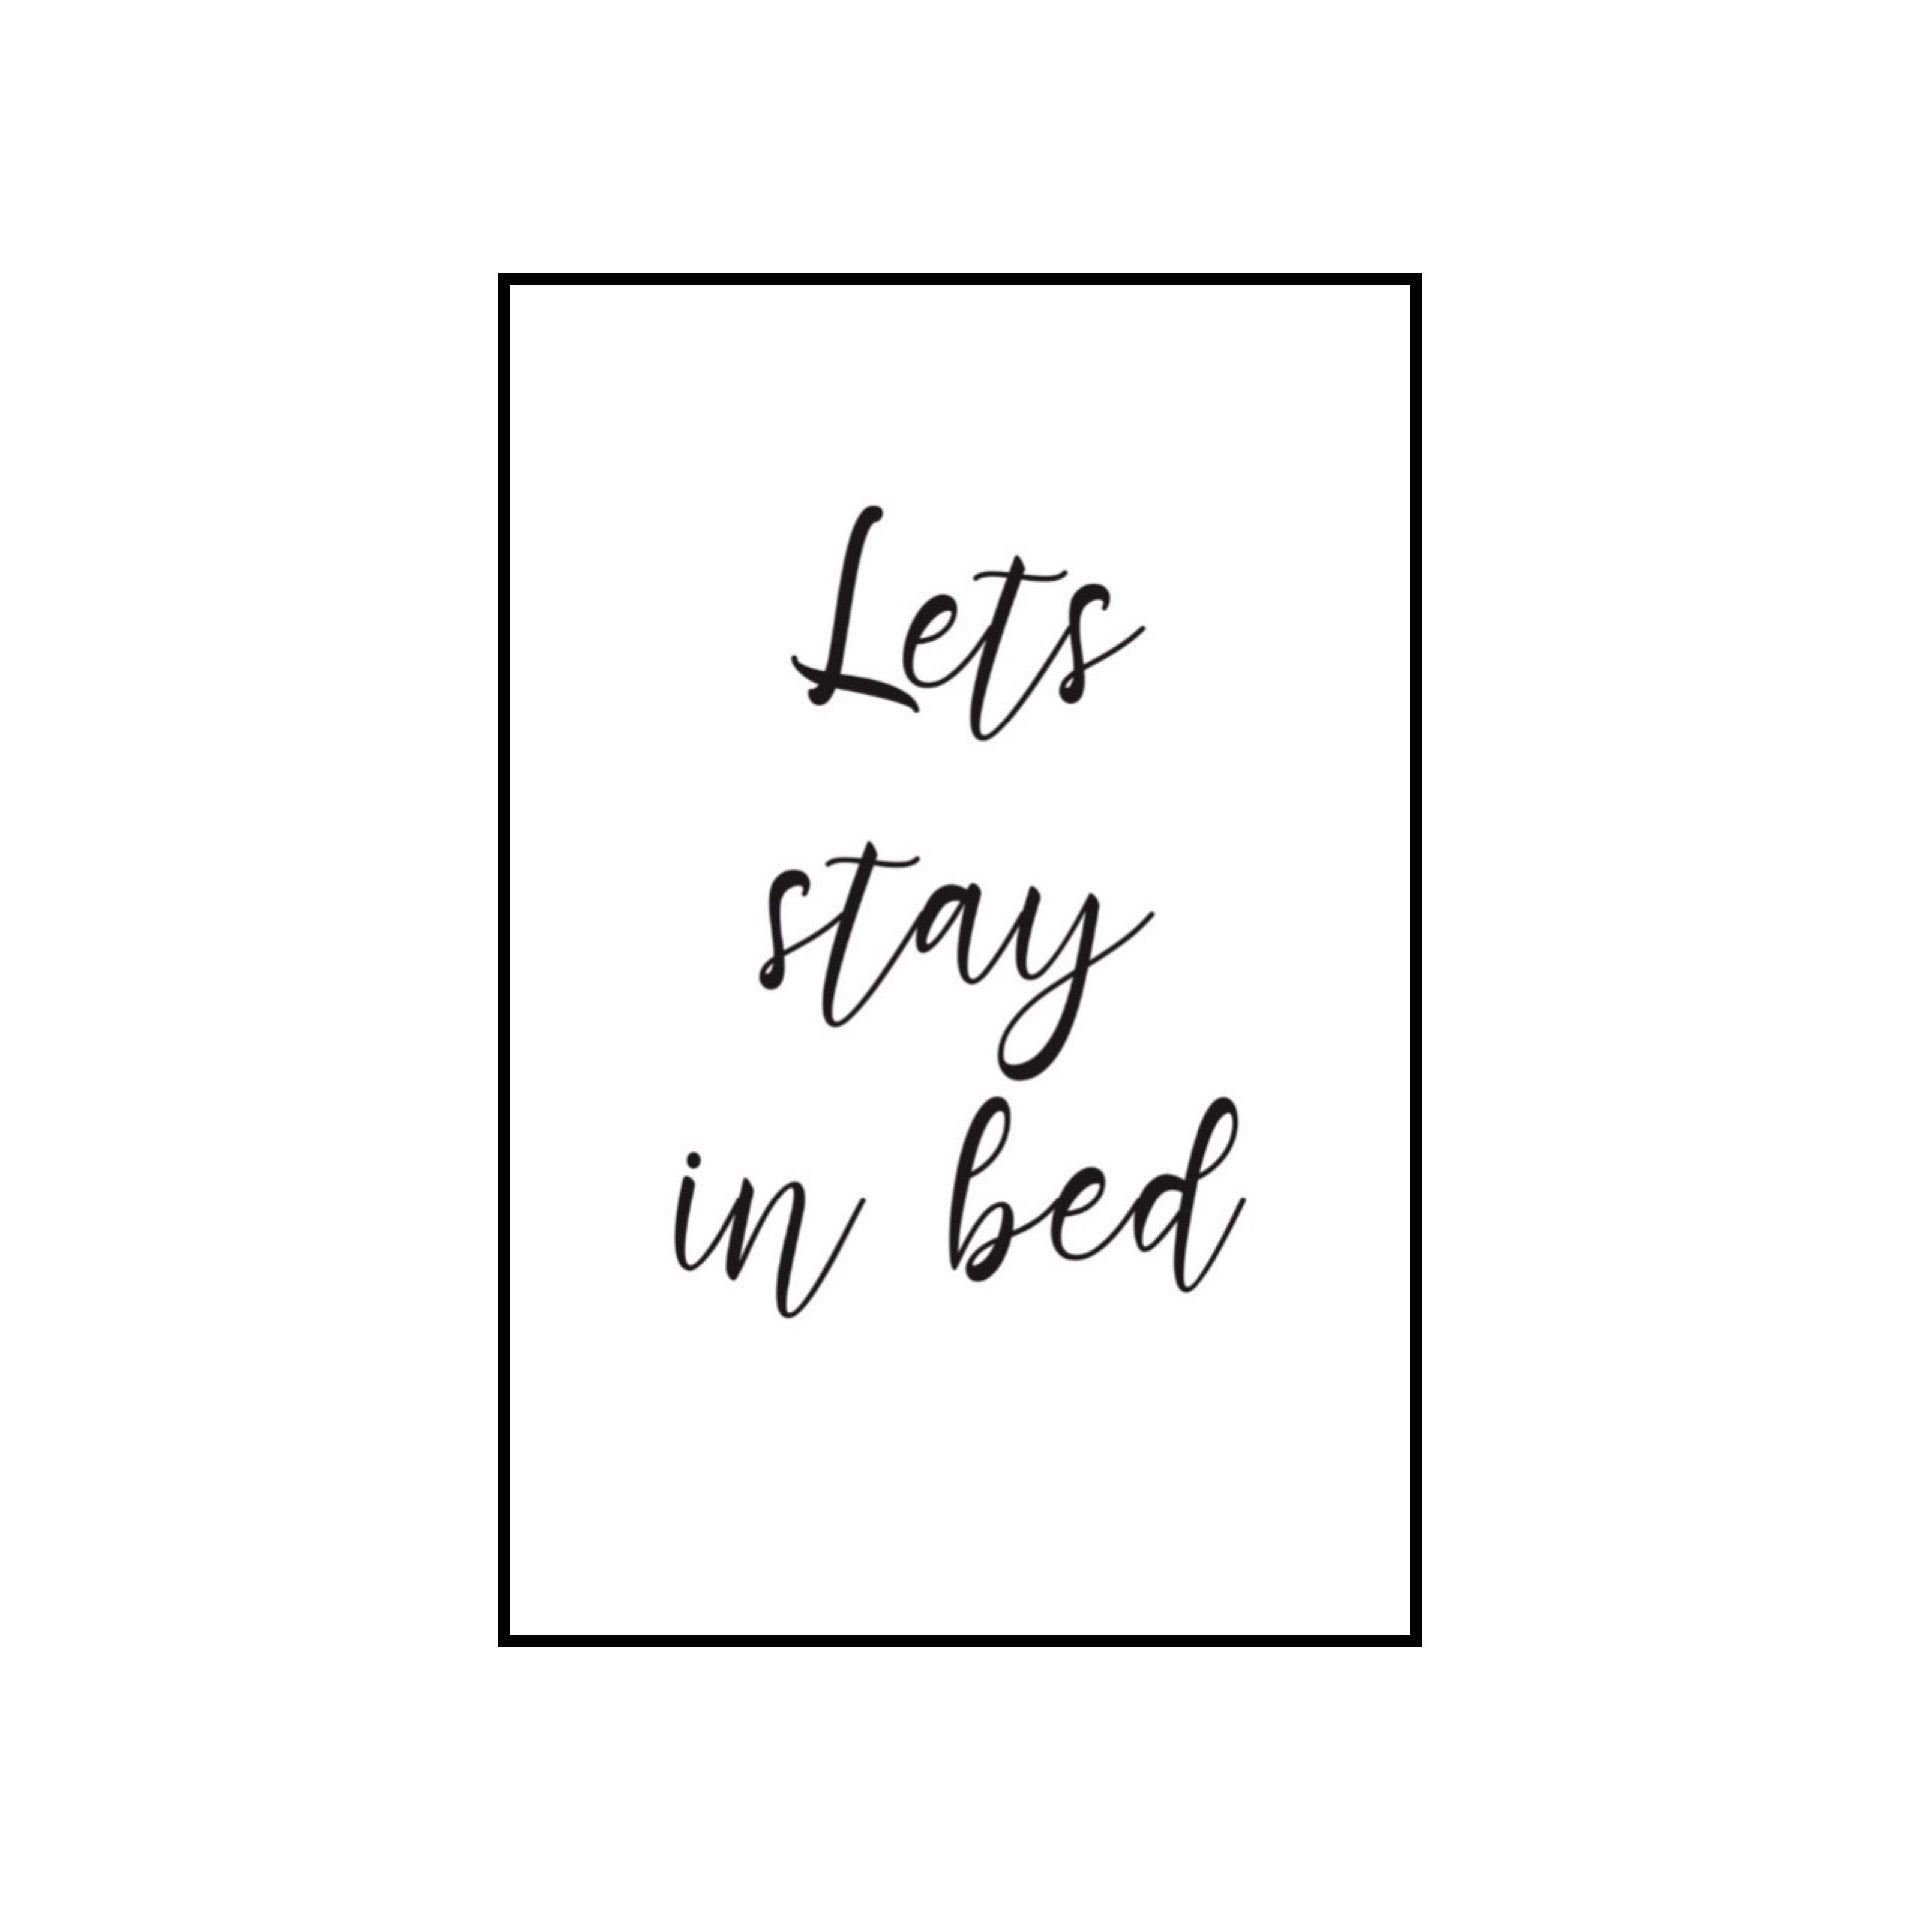 Let’s stay in bed - THE WALL STYLIST